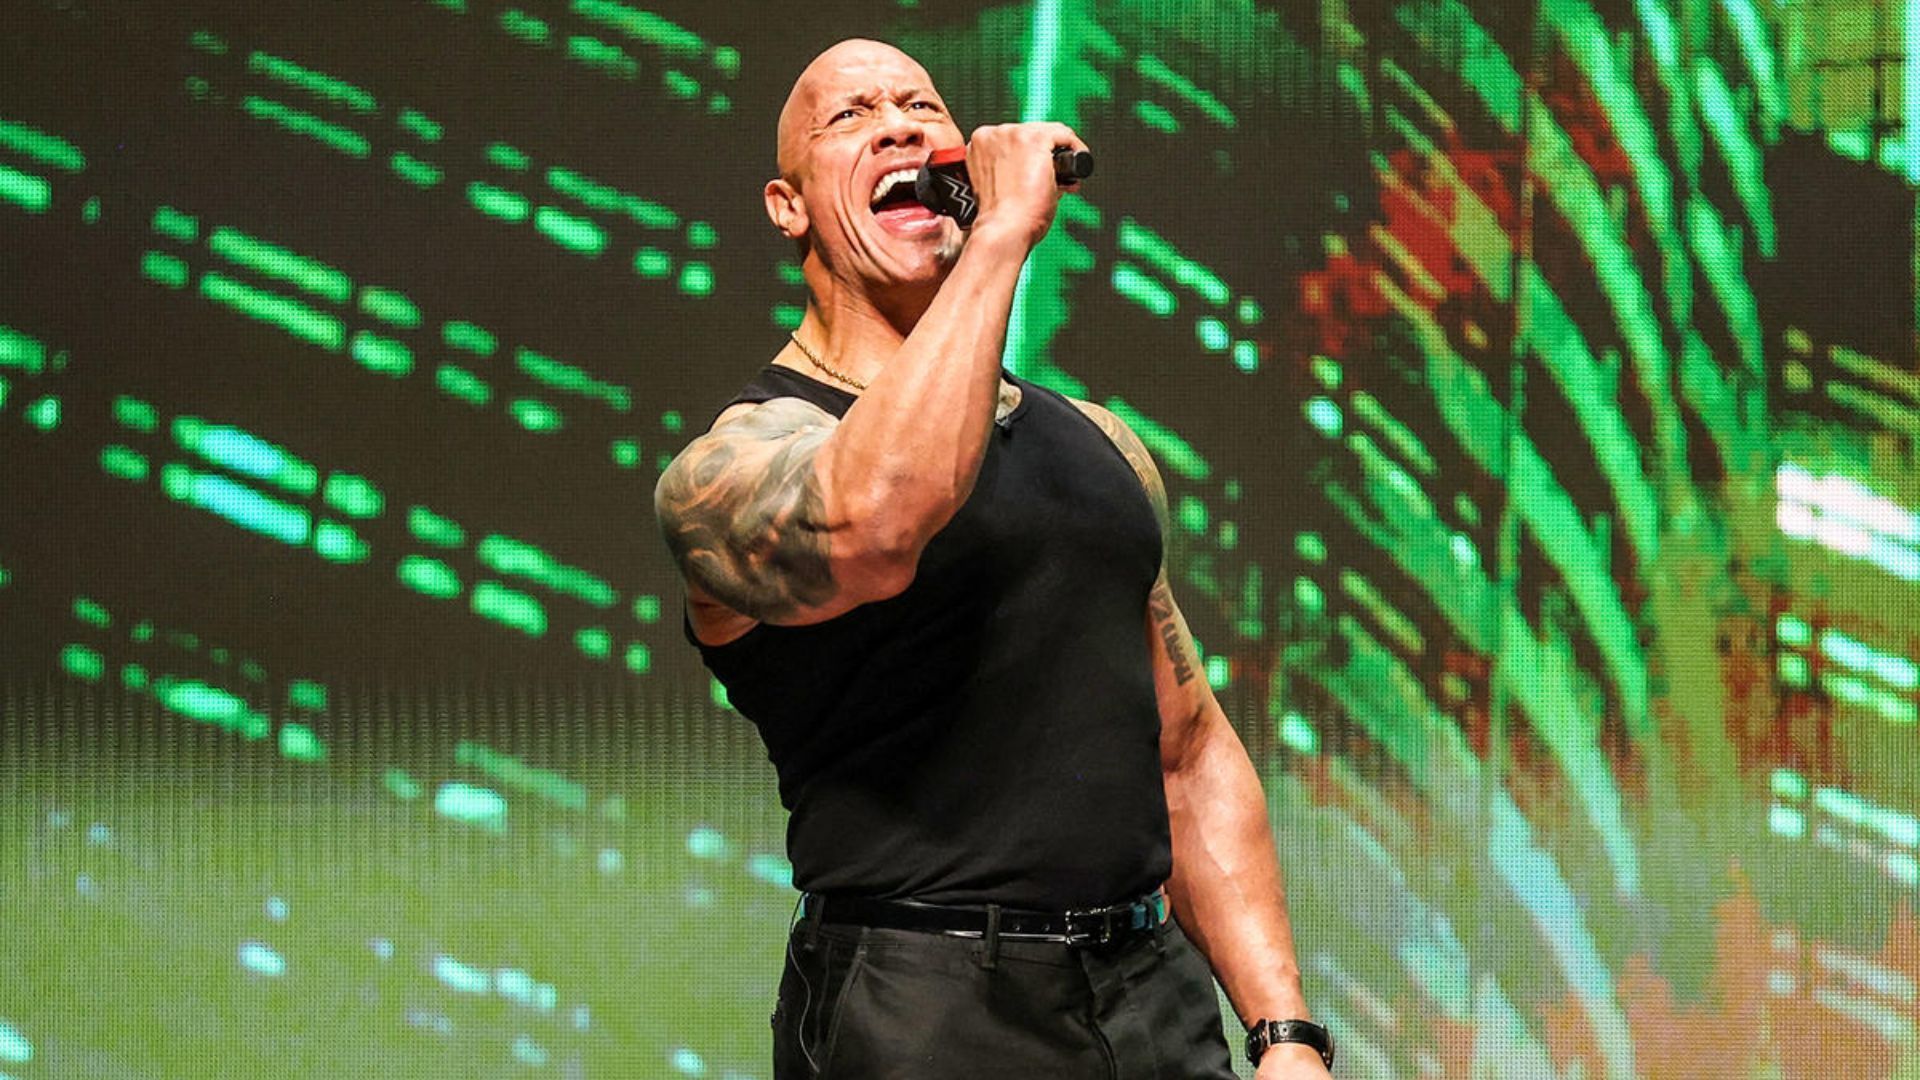 The Rock is one of the most polarizing figures in WWE history